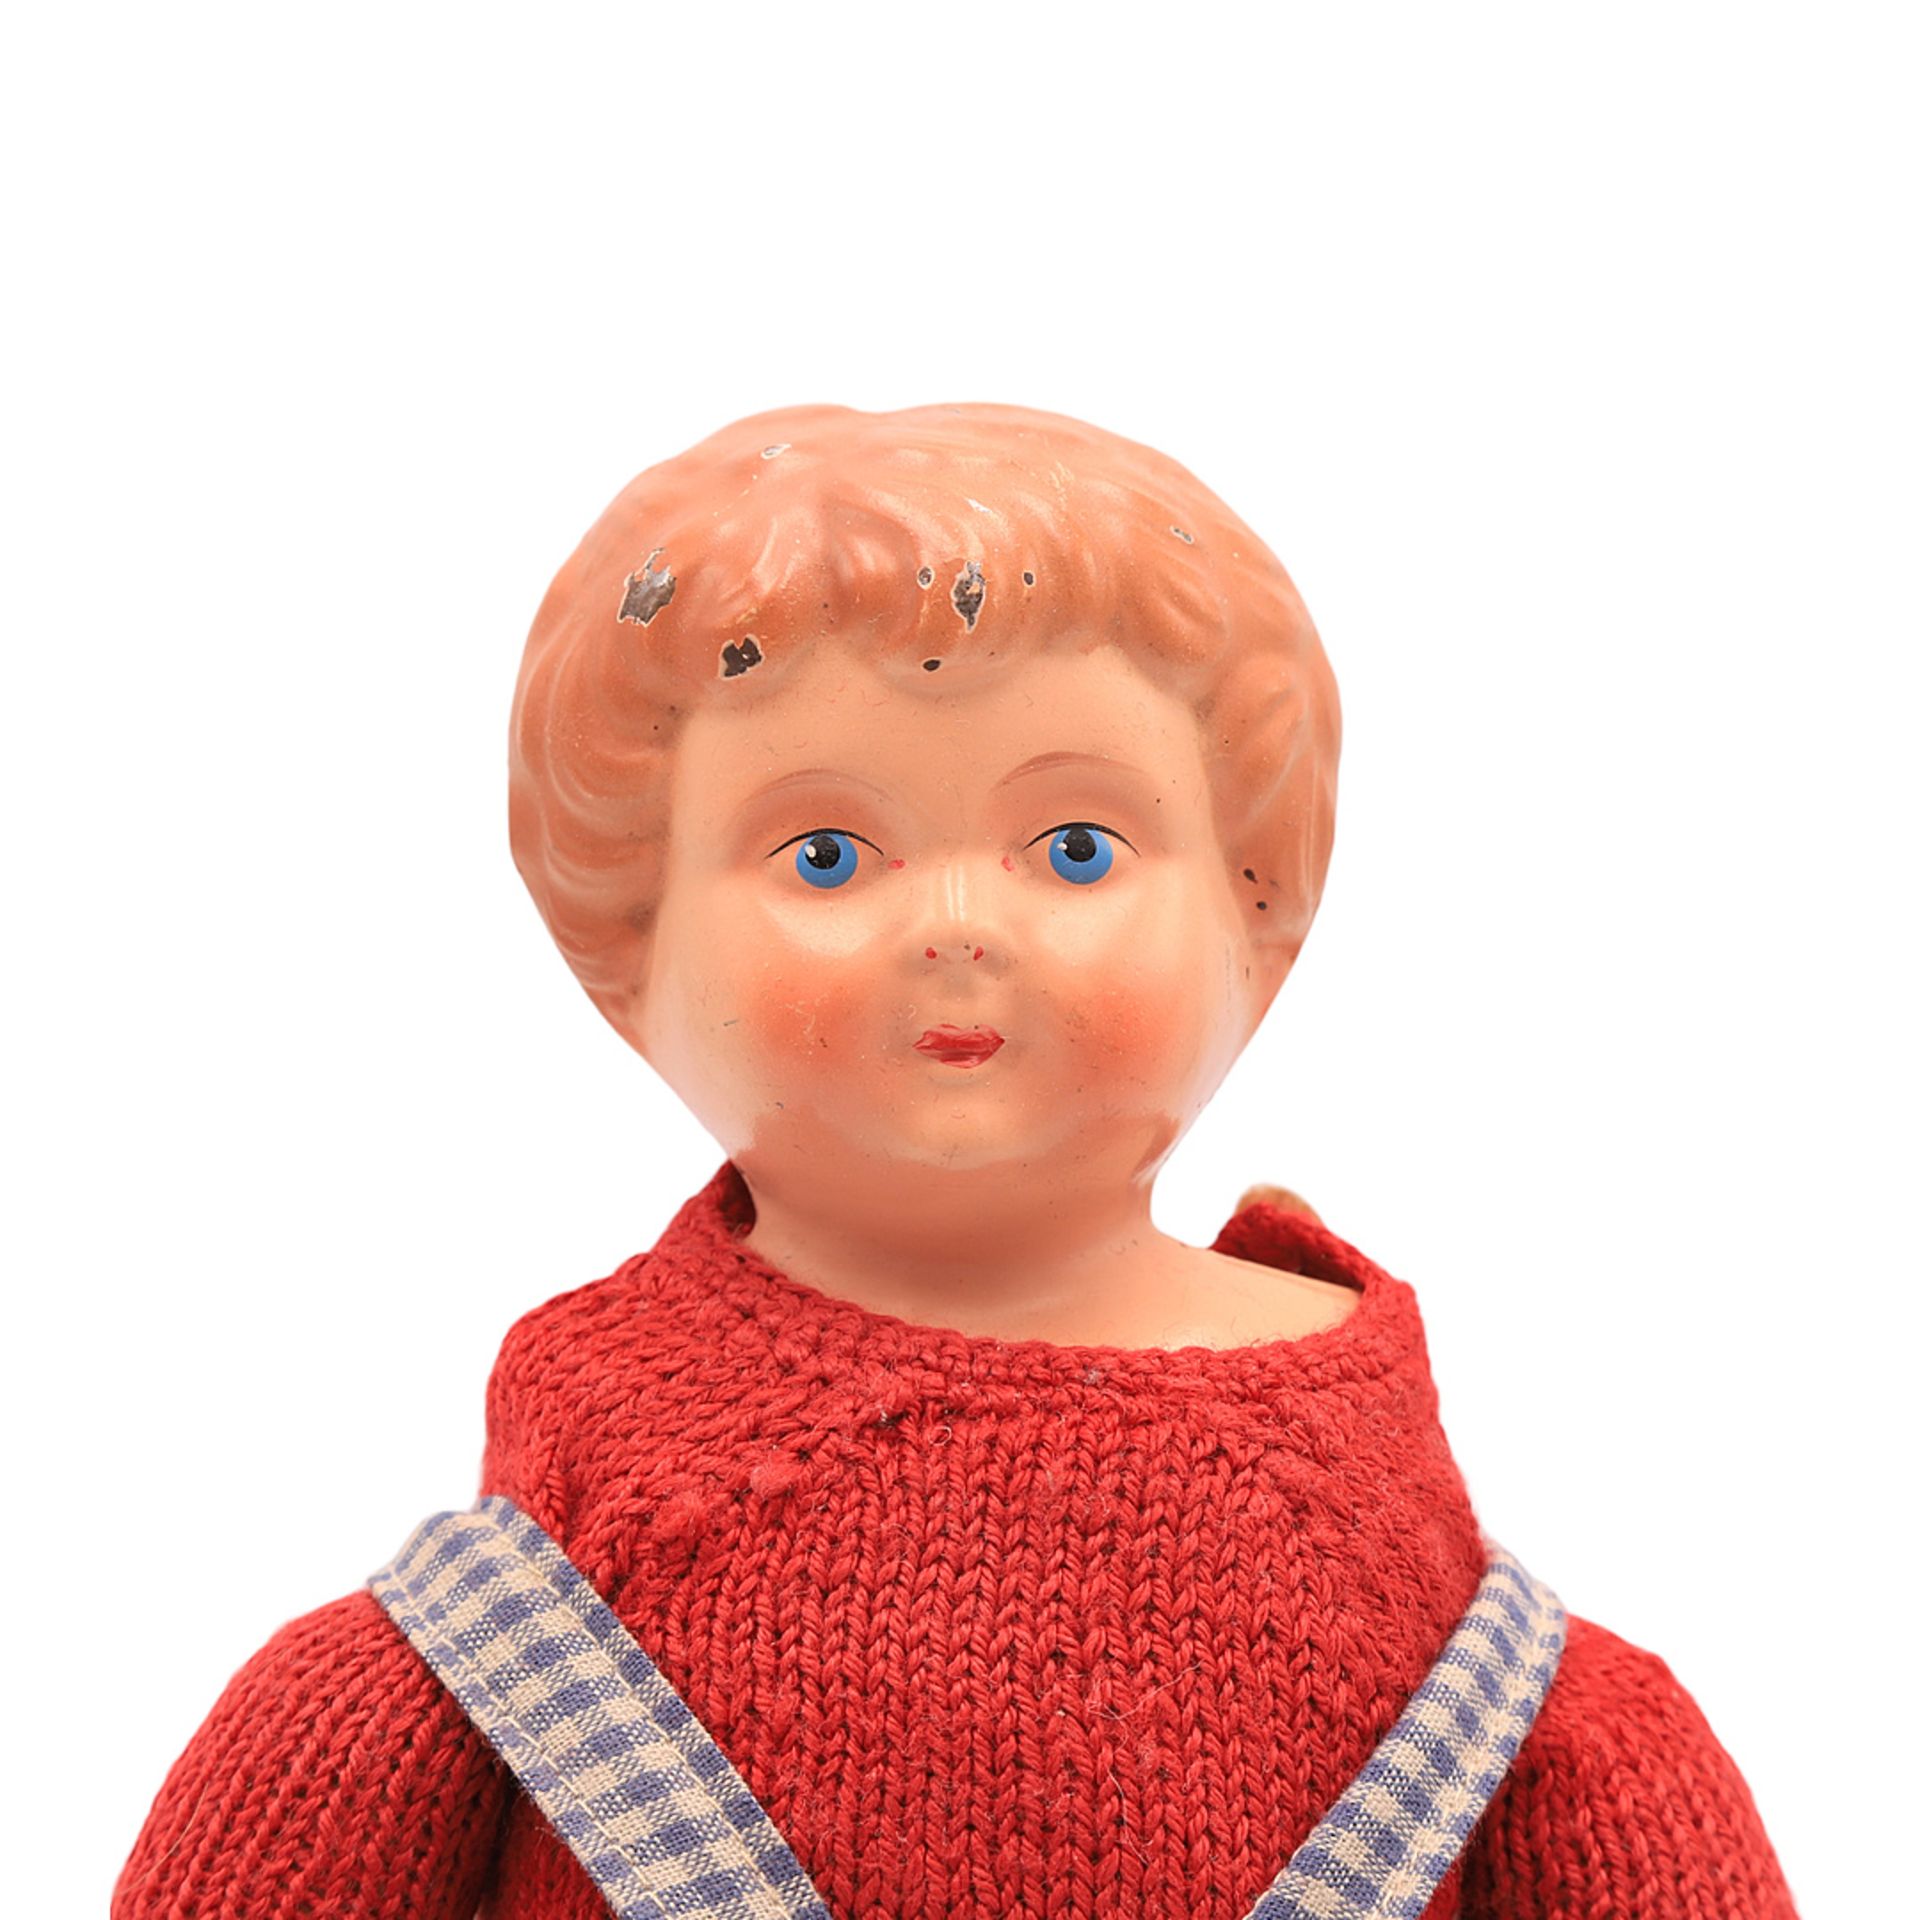 Buschow & Beck / Minerva doll, 1st half of the 20th century - Image 2 of 4